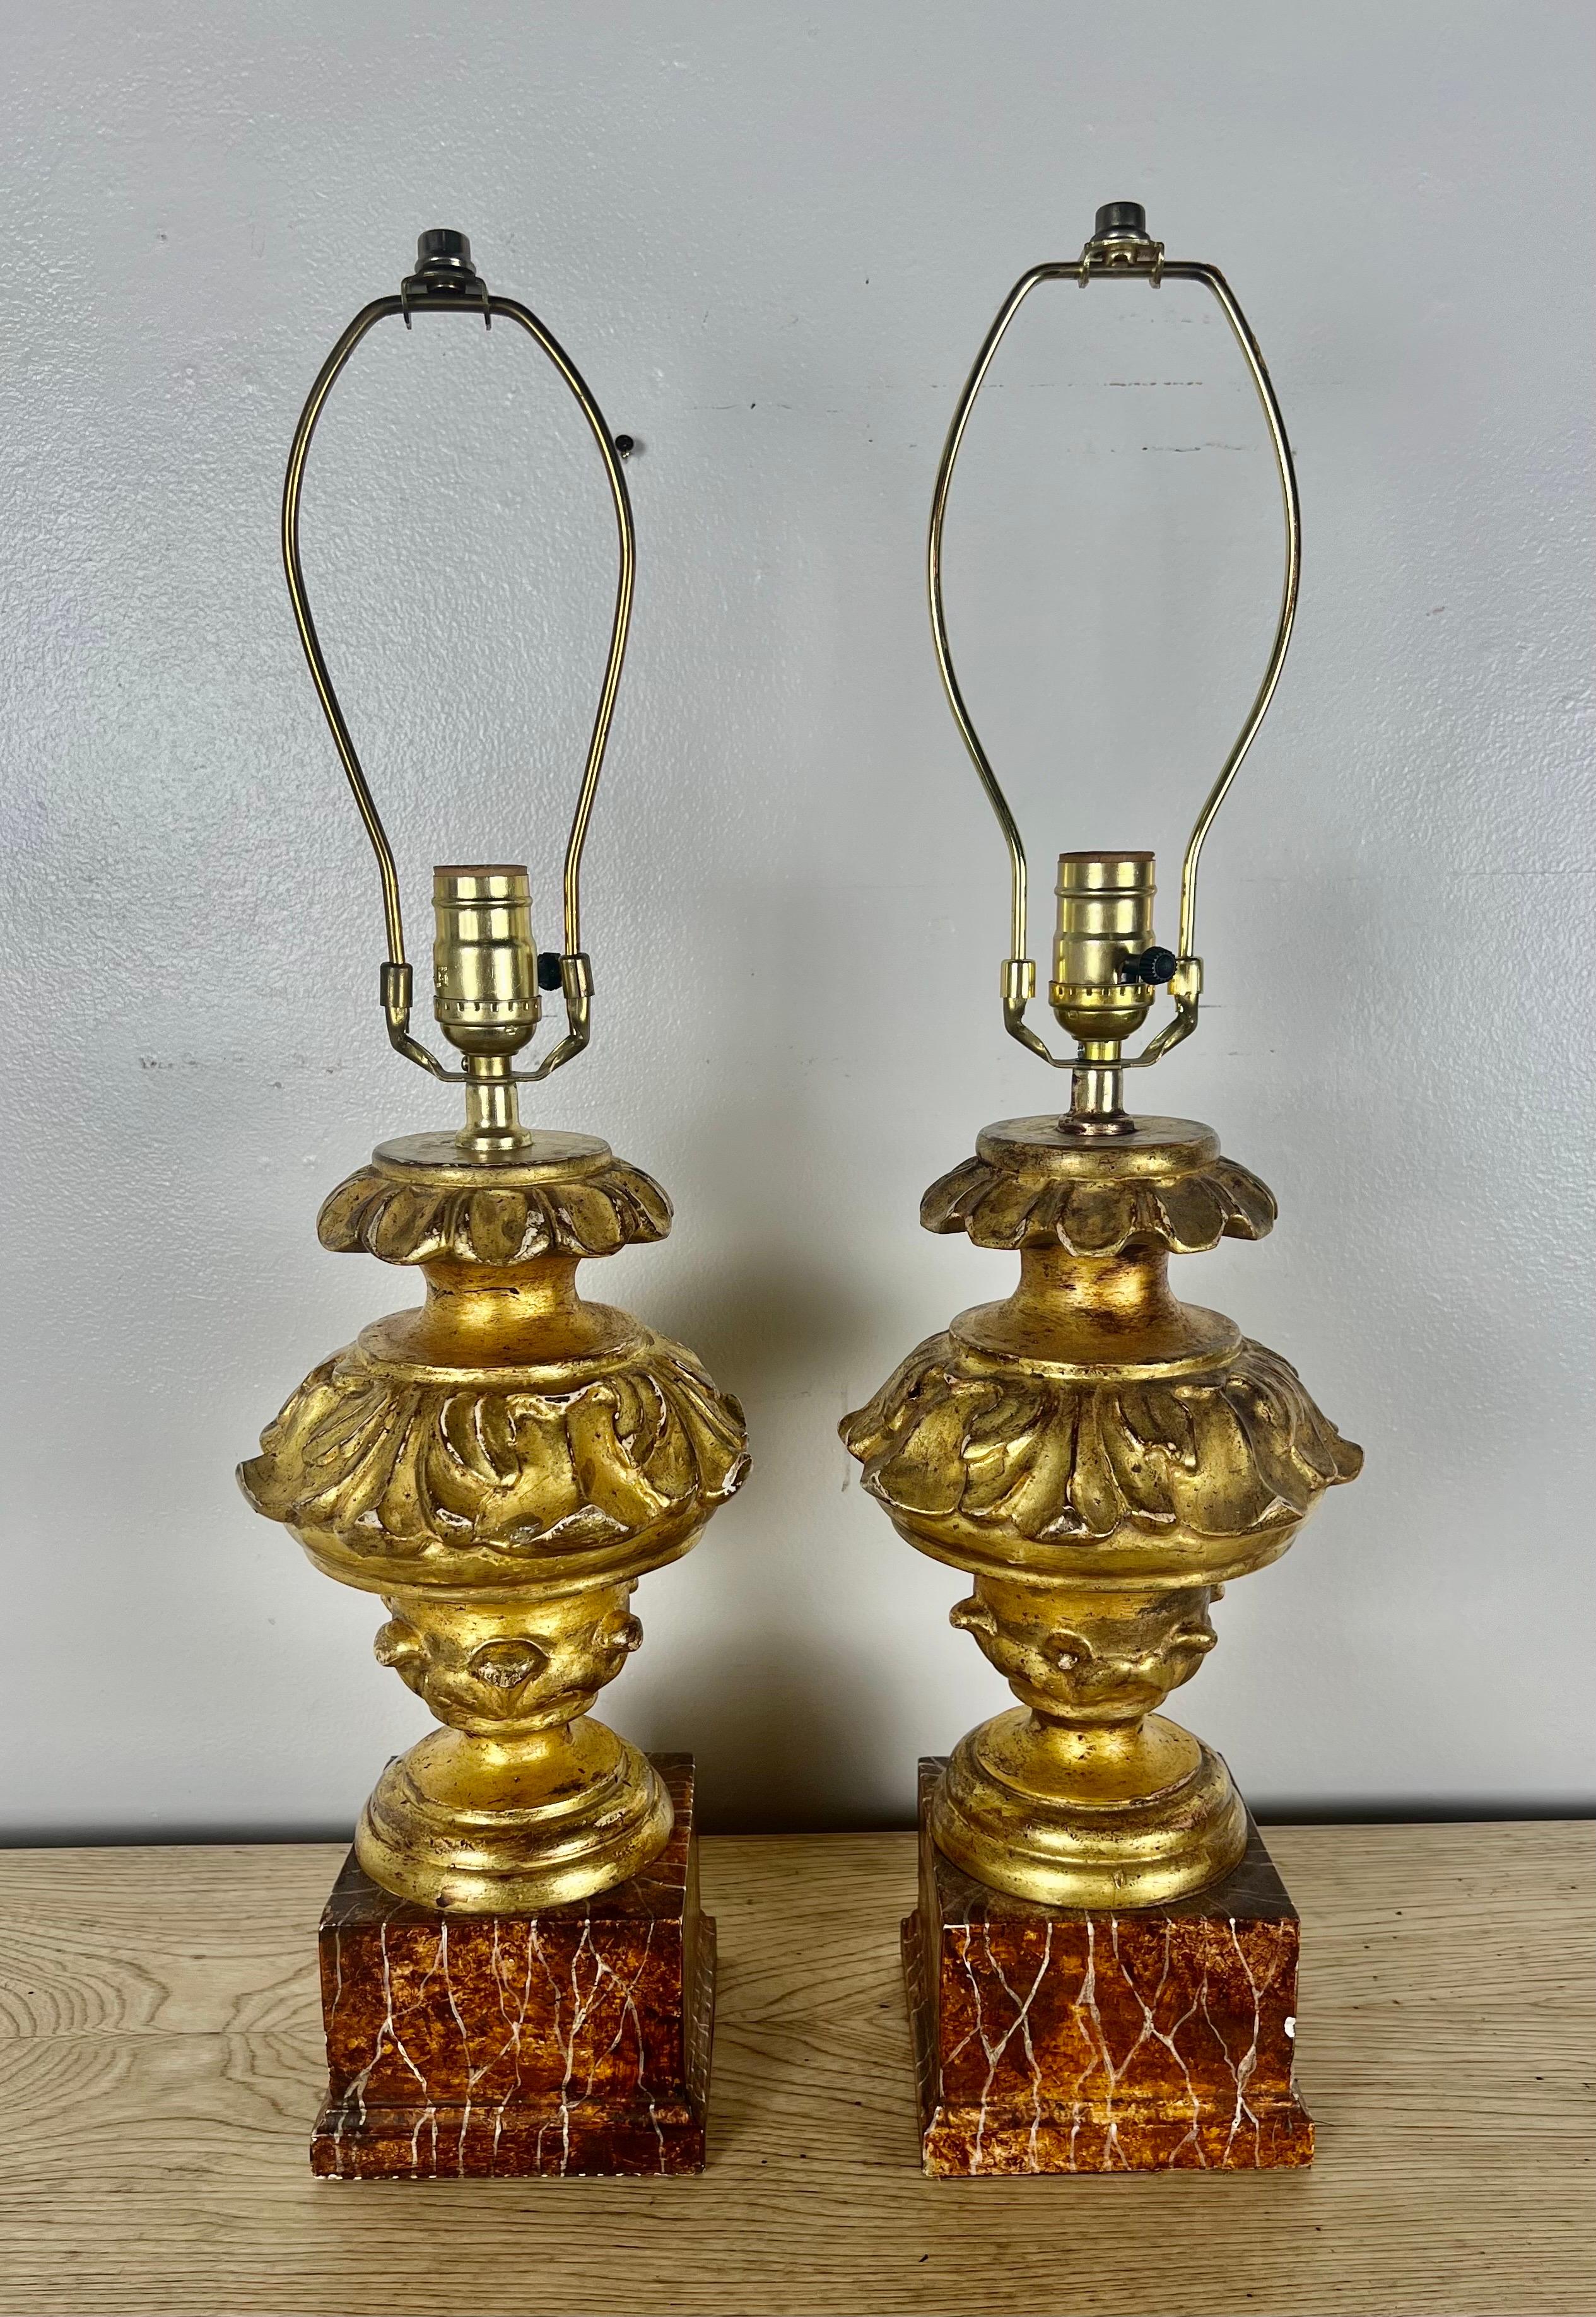 Pair of Carved Giltwood Italian Neoclassical style lamps on faux marble bases. The lamps are wired and in working condition.  No shades included.